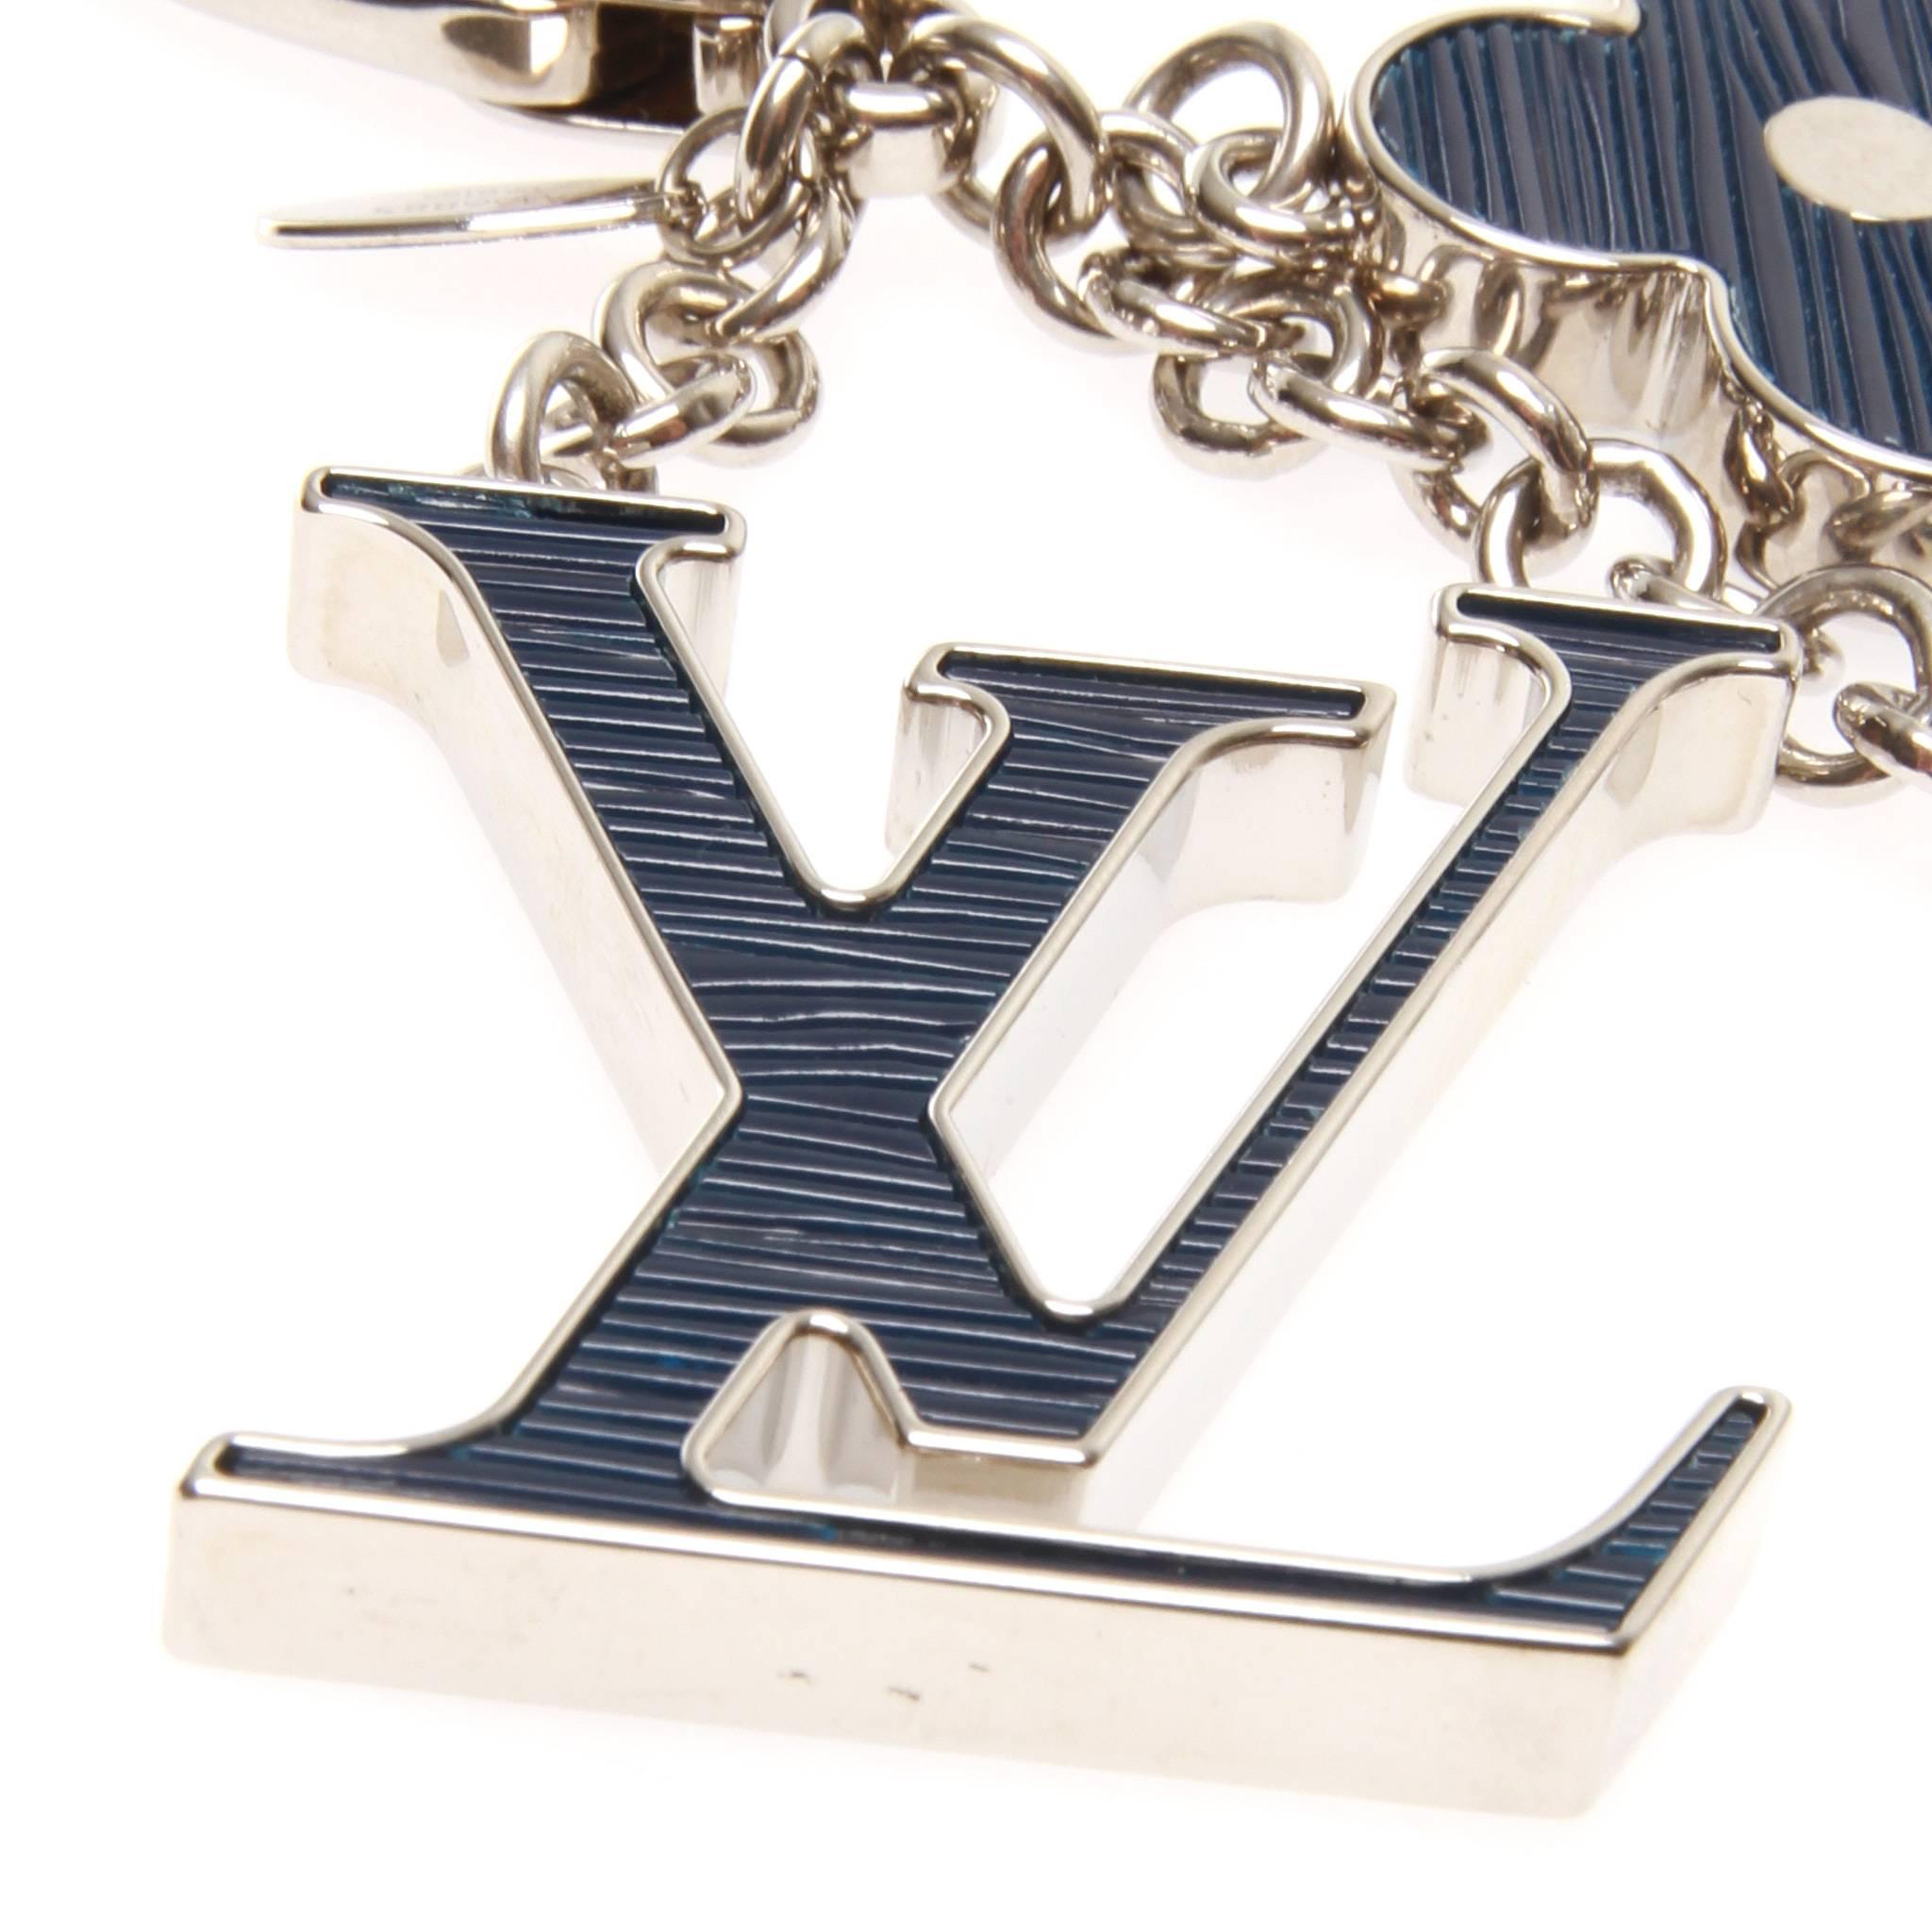 Louis Vuitton Fleur D'Epi  bag charm in blue. Featuring the iconic monogram shapes formed of palladium-finish brass and inlaid with resin, this bag charm is simple and effective. The inlaid resin is set to imitate the appearance of LV's Epi leather